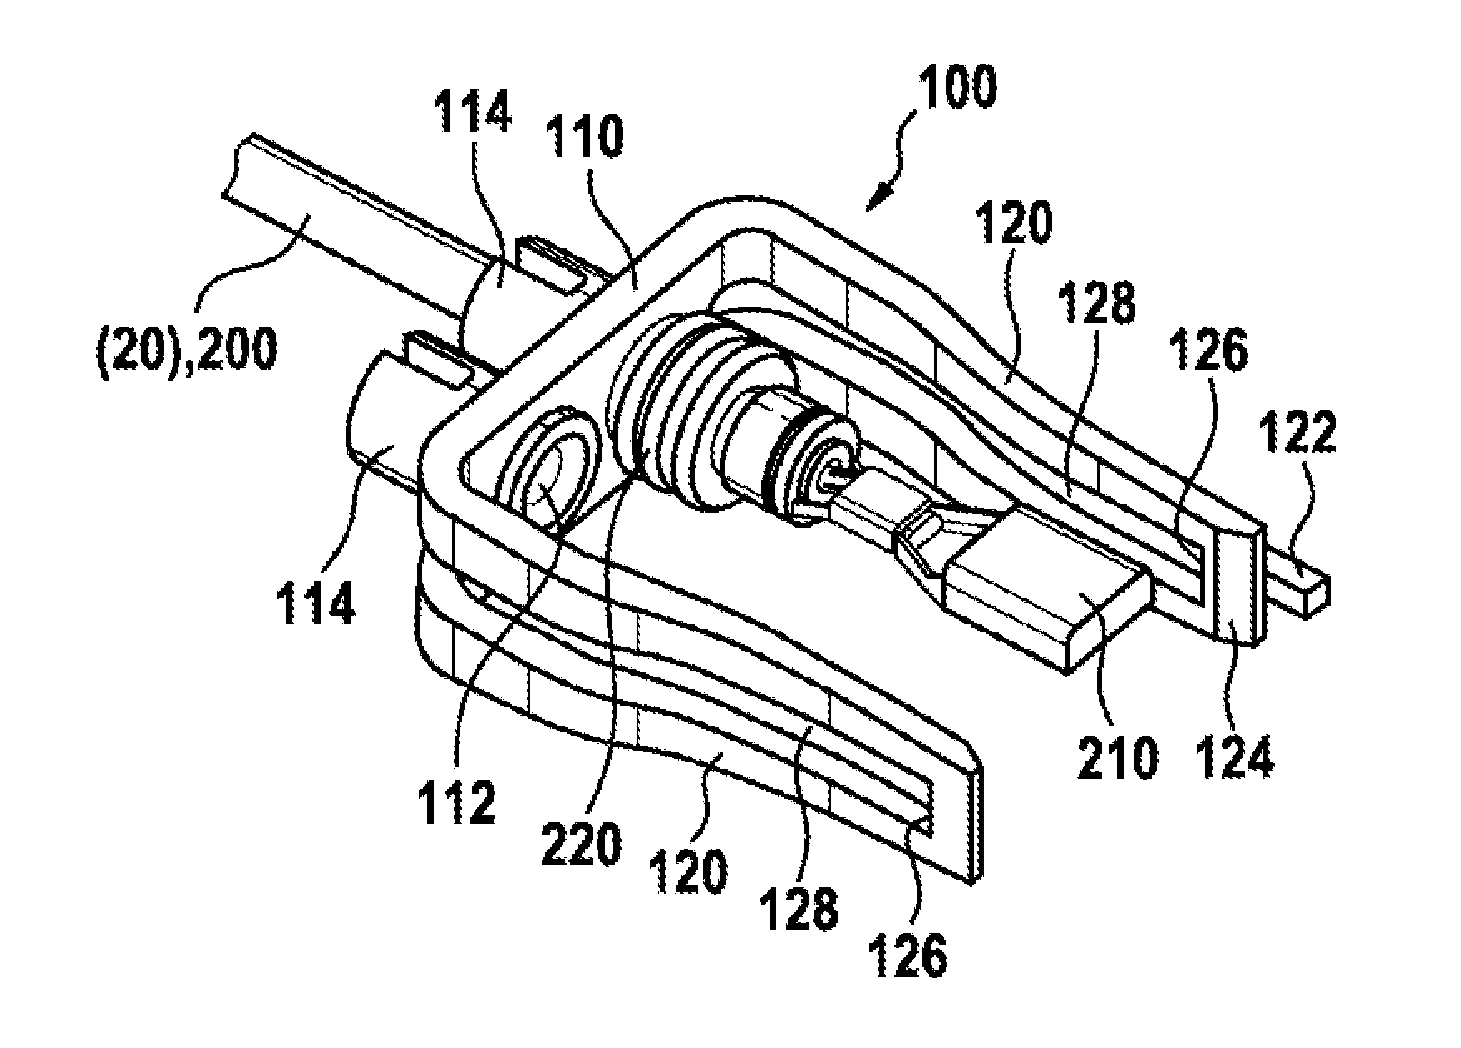 Electrical clip connector, electrical clip connection and also ready-to-use electrical cable